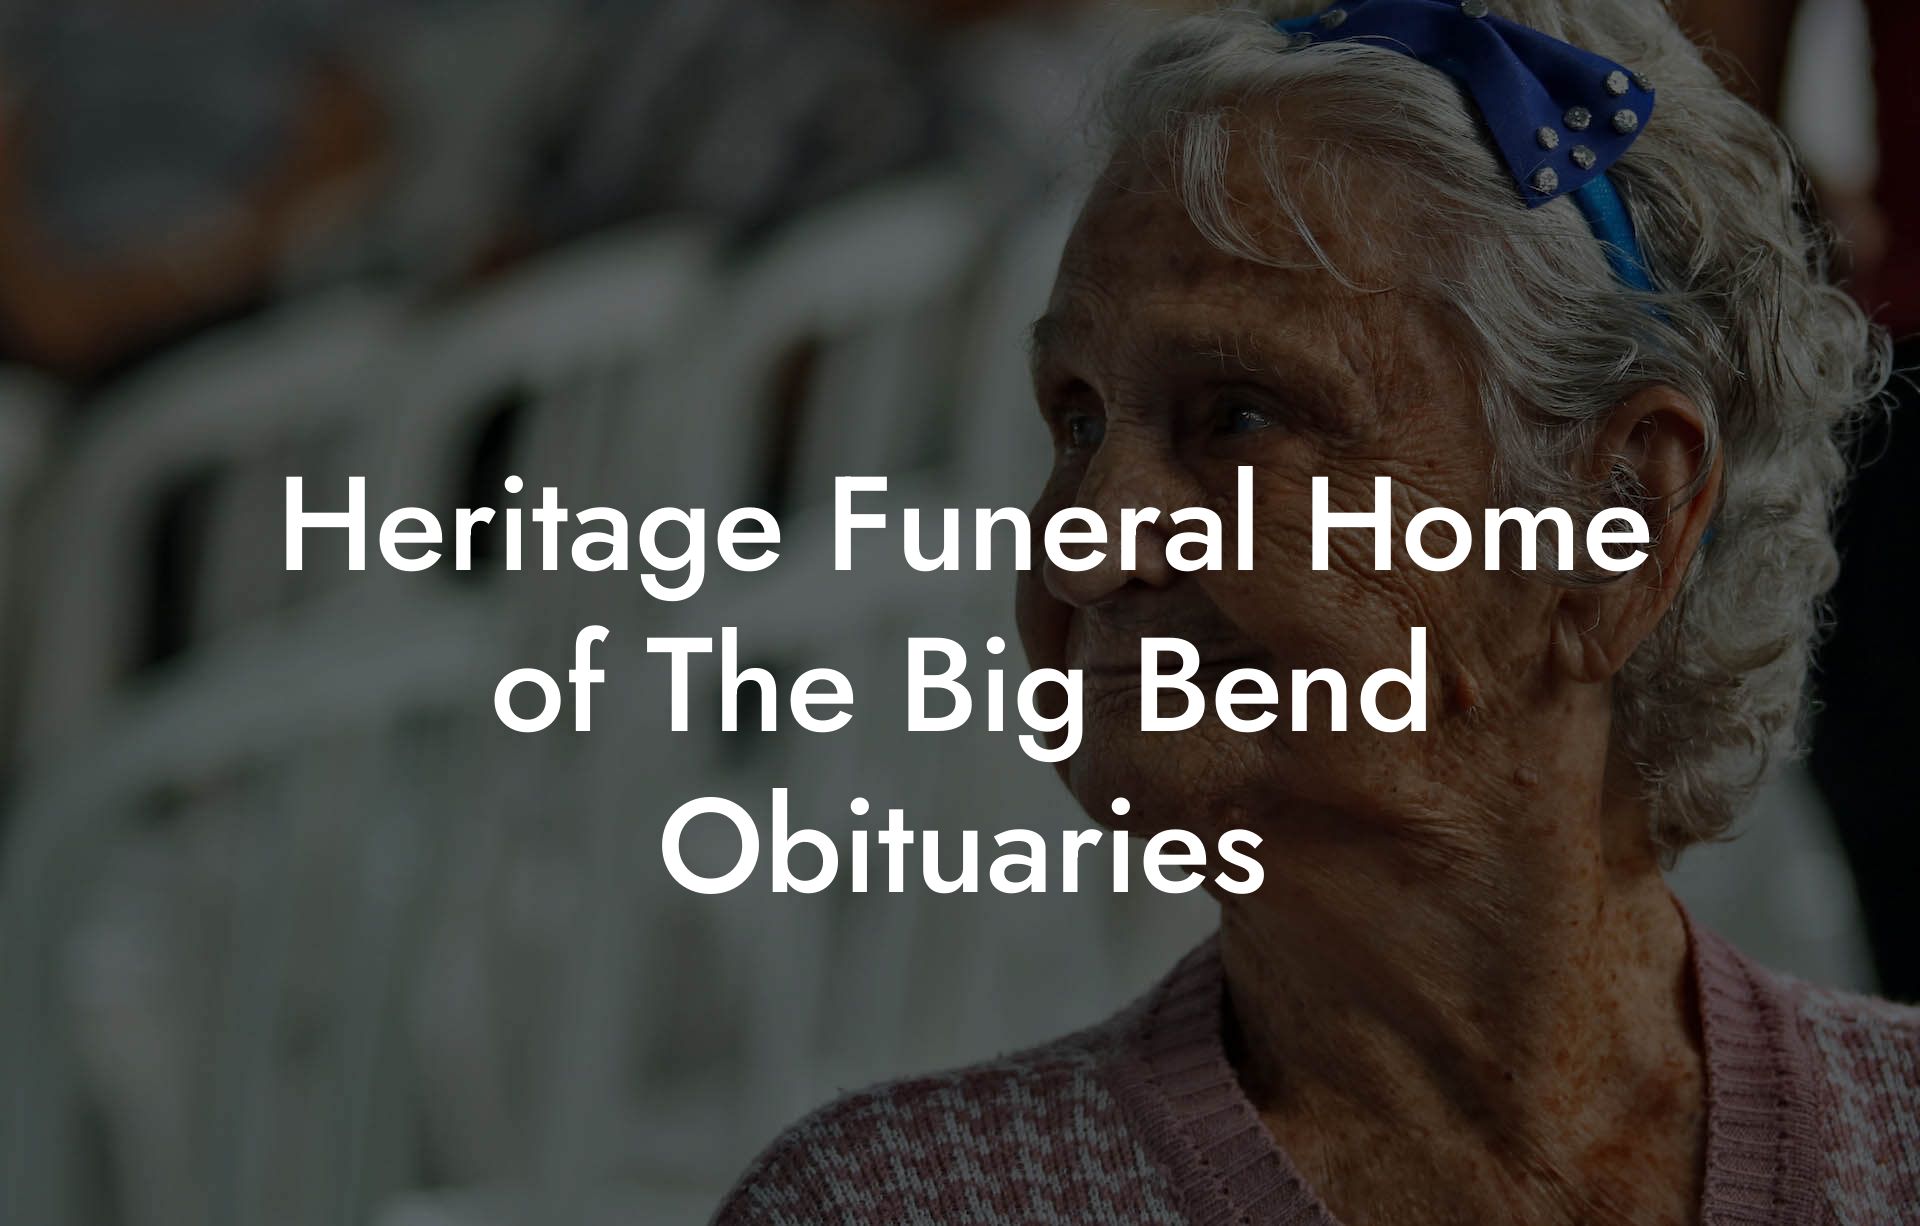 Heritage Funeral Home of The Big Bend Obituaries